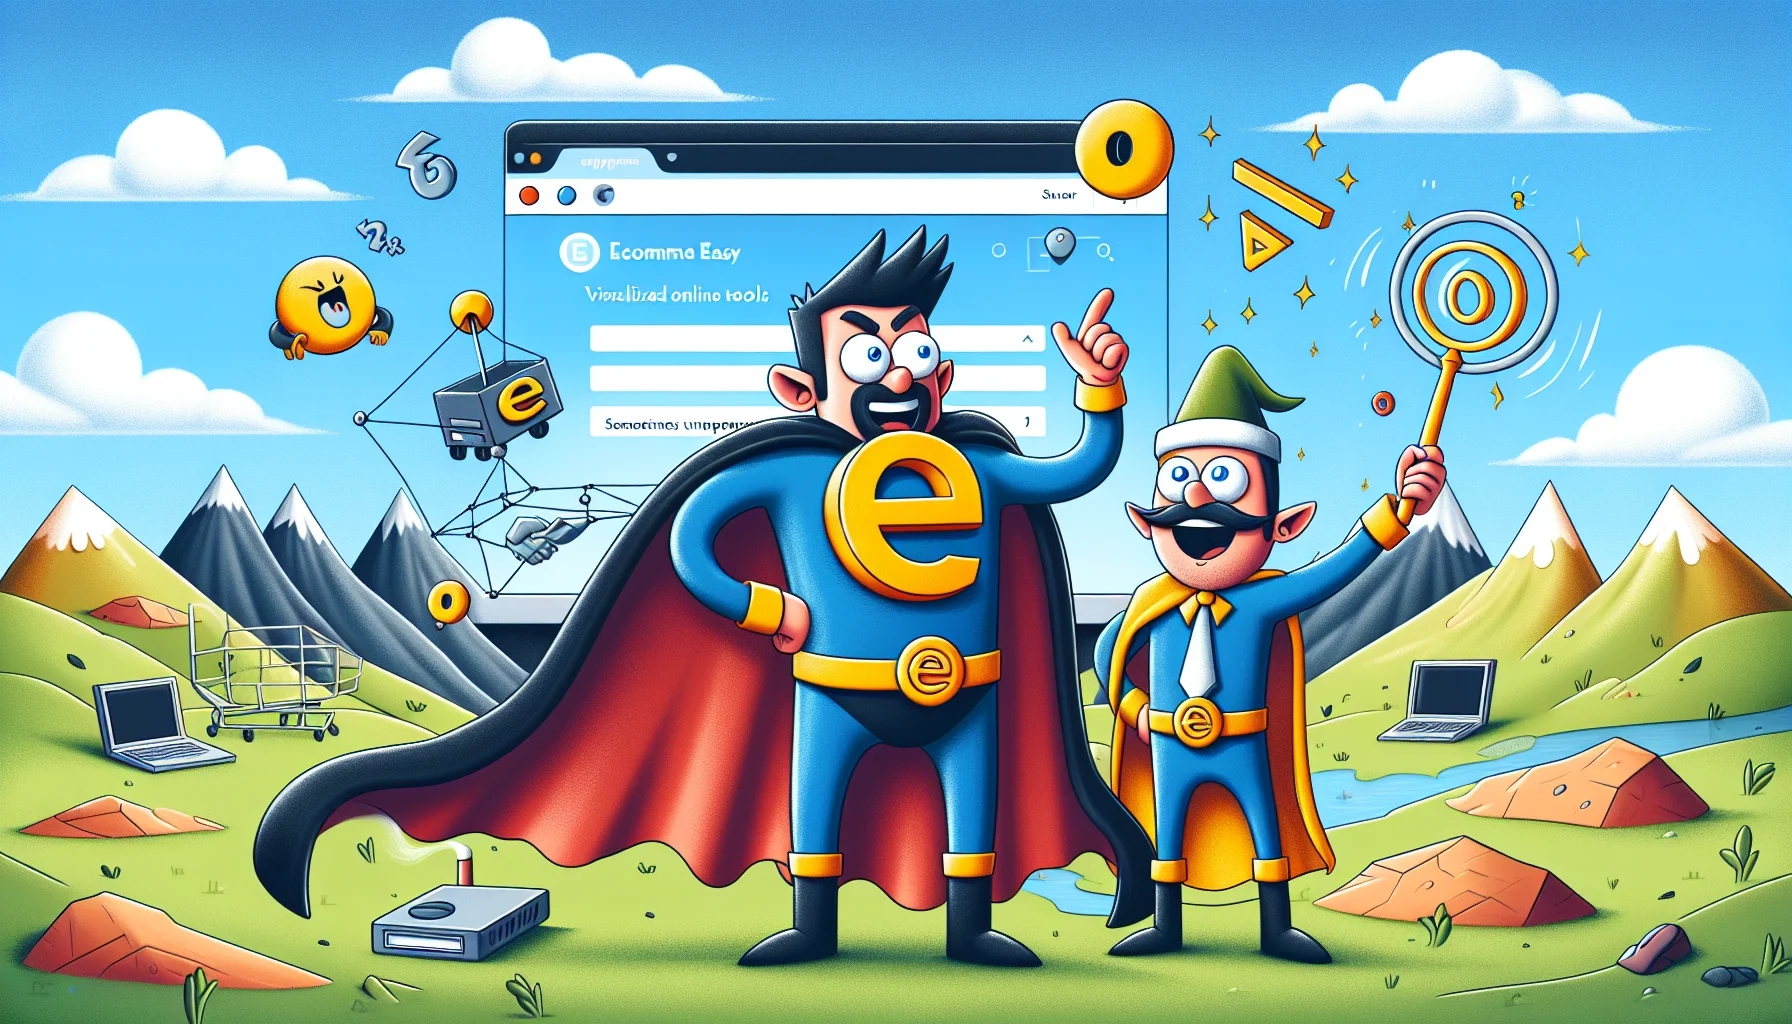 Create a quirky image where browsers for visualized online tools, dubbed 'Ecommerce Easy' and 'Website Wonder', indicating similarities to common web hosting platforms, are presented in a humorous situation. In this scenario, 'Ecommerce Easy' could be depicted as a charismatic yet somewhat clumsy superhero with a large 'E' symbol on the chest, while 'Website Wonder' could be shown as an overly excited wizard with a magical wand that sometimes works unpredictably. The background could feature a landscape symbolizing the digital world, with 1s and 0s, and other tech peripherals like routers and screens, adding to the antic drama.